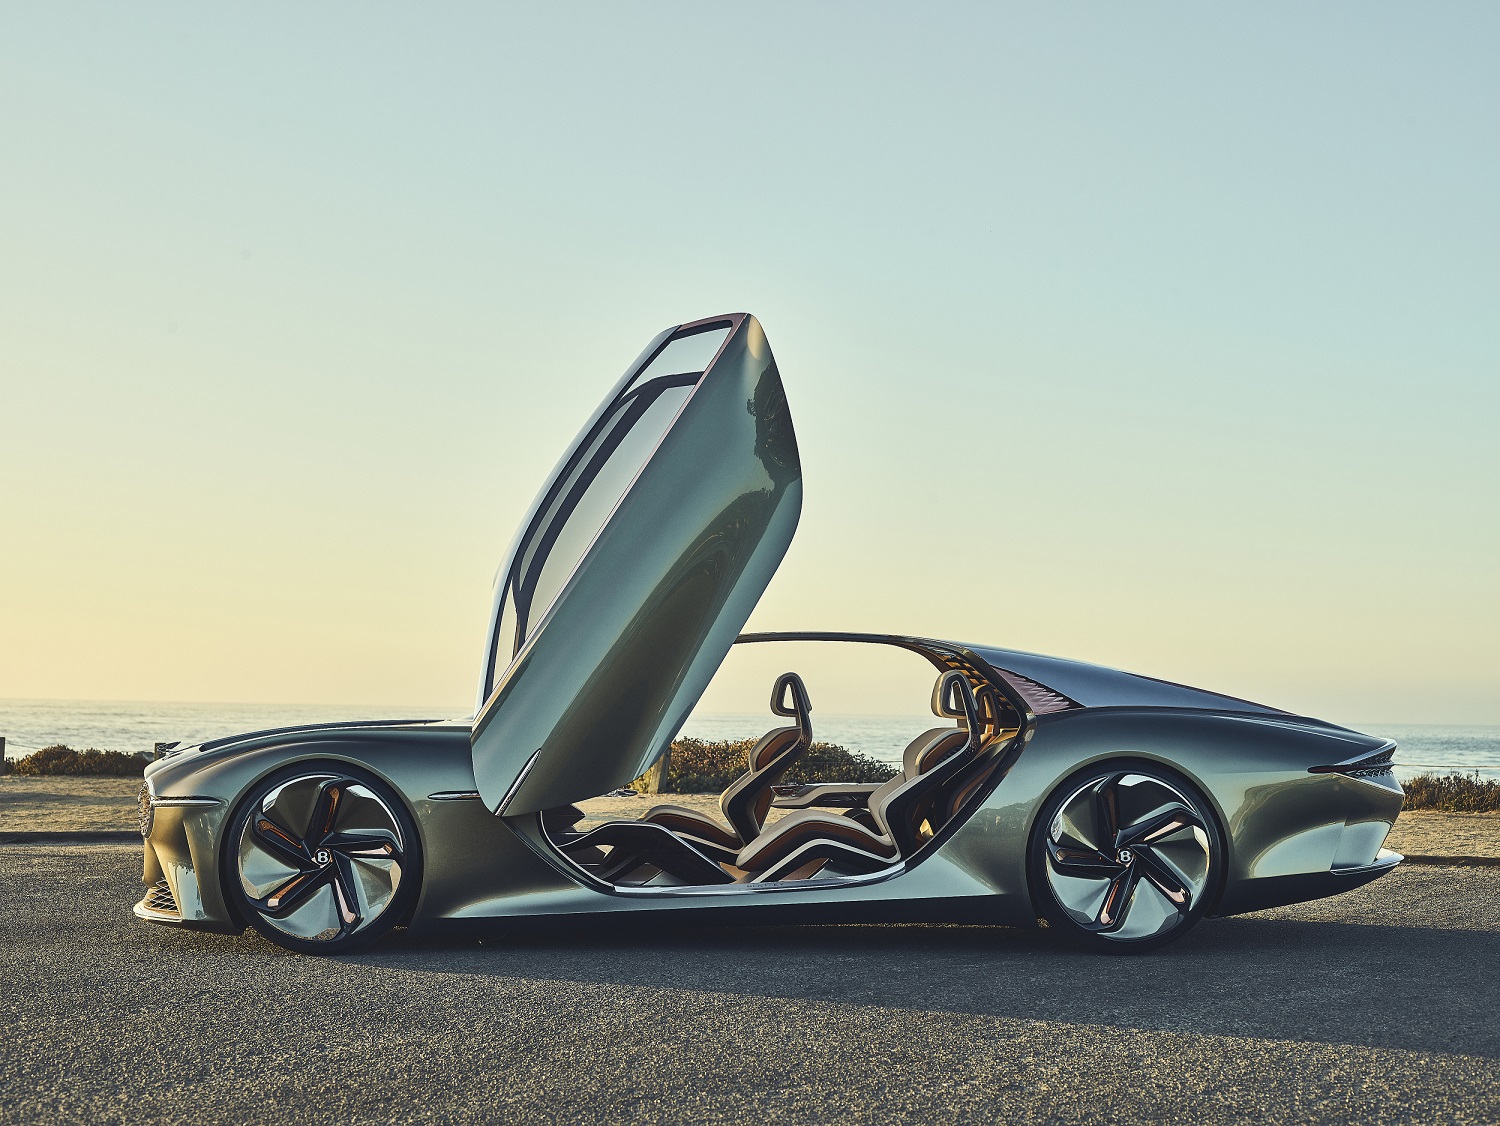 Bentley Exp 100 GT Crowned ‘Most Beautiful Concept Car of the Year’ at the Festival Automobile International